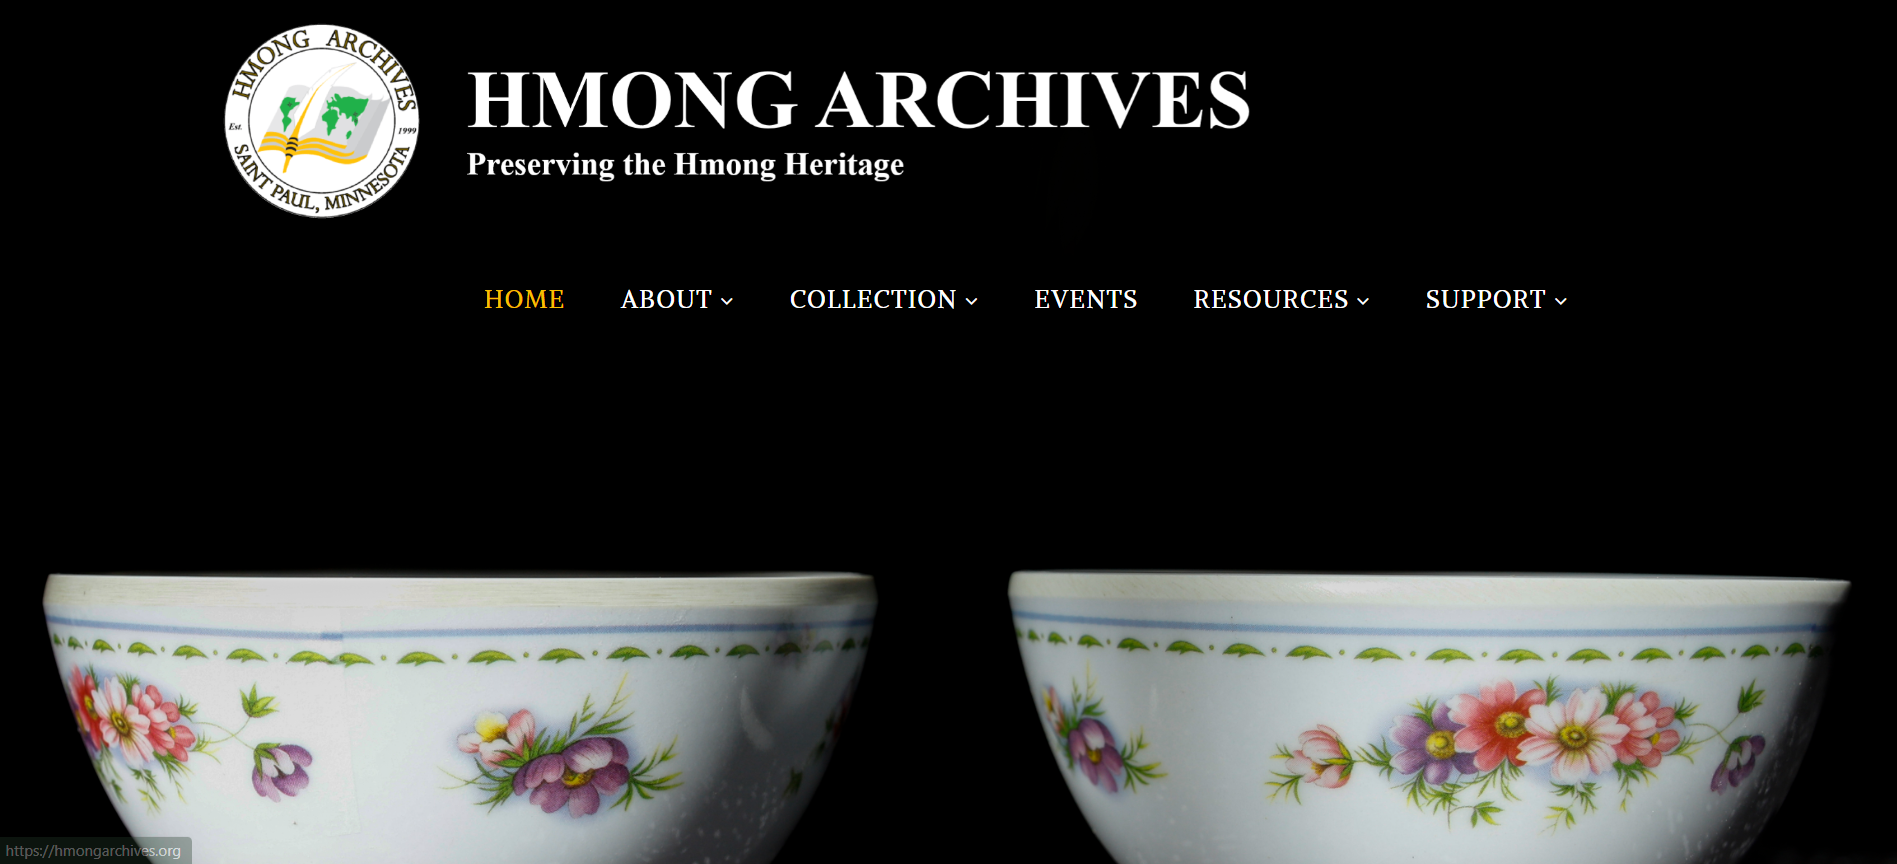 Hmong Archives Website